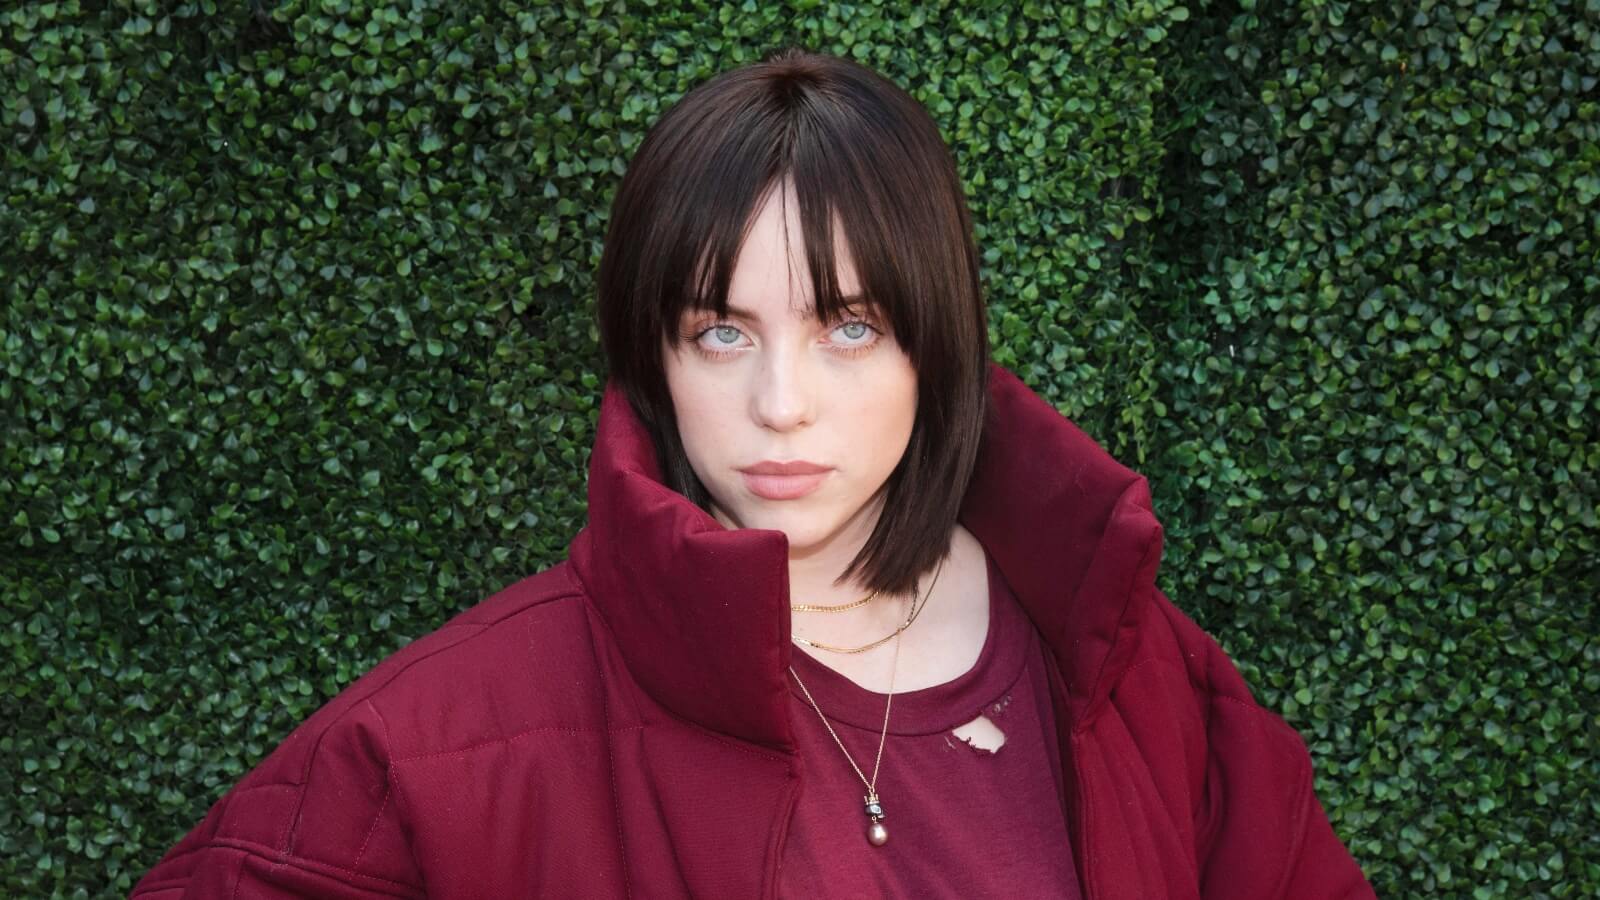 Billie Eilish standing in front of a hedge